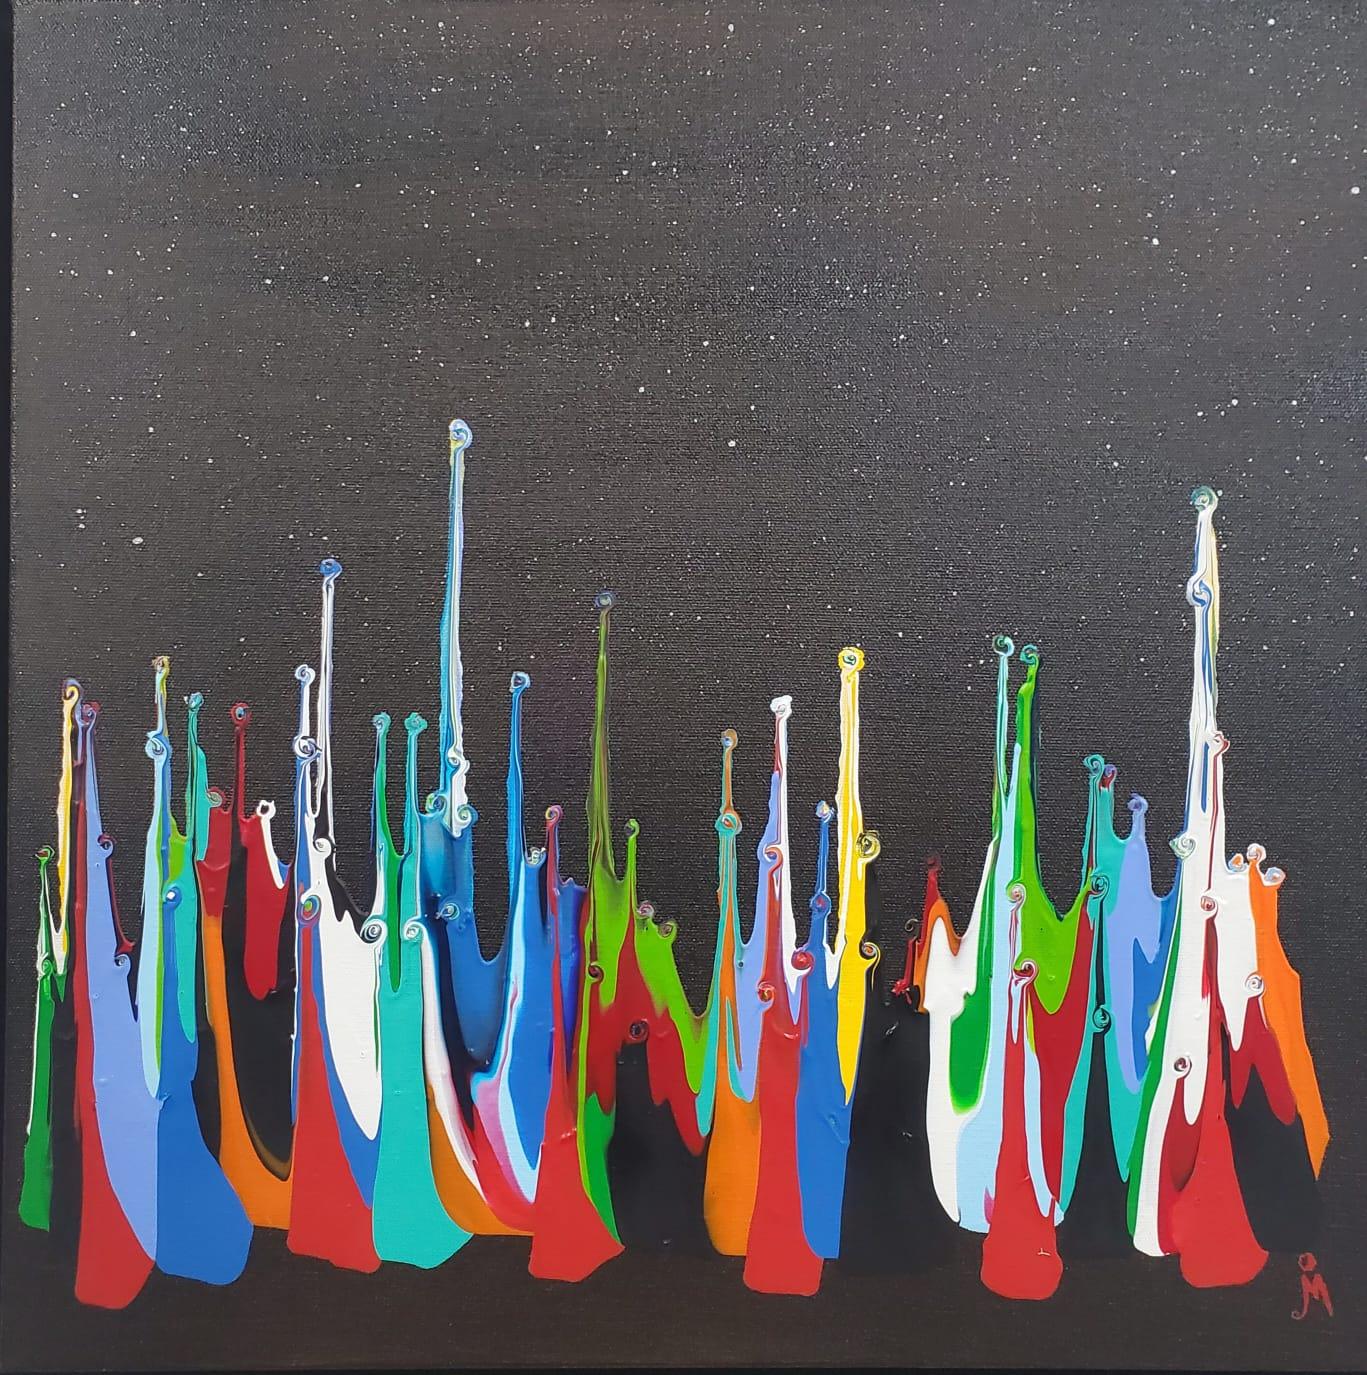 Children of the World: Midnight #10 - Abstract Painting by J. Oscar Molina